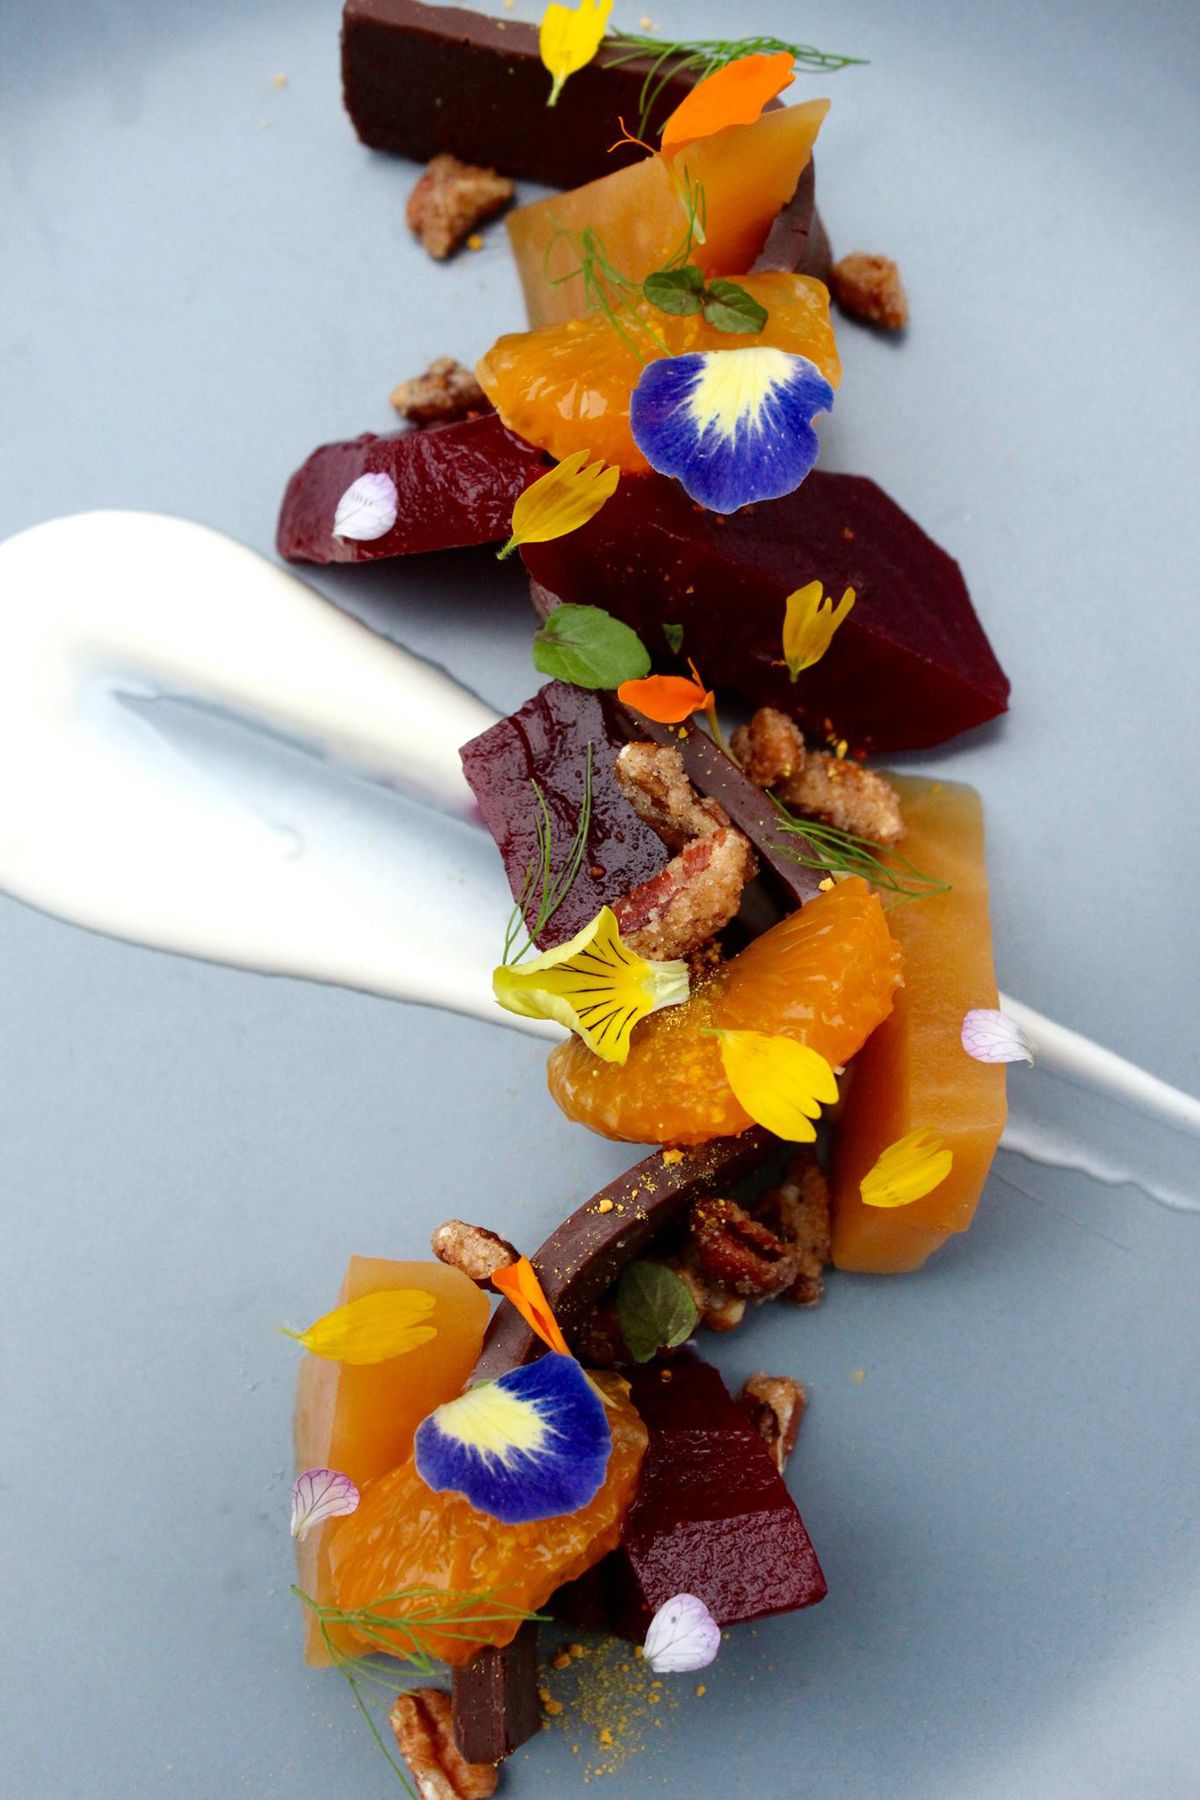 Candied beets and chocolate ganache